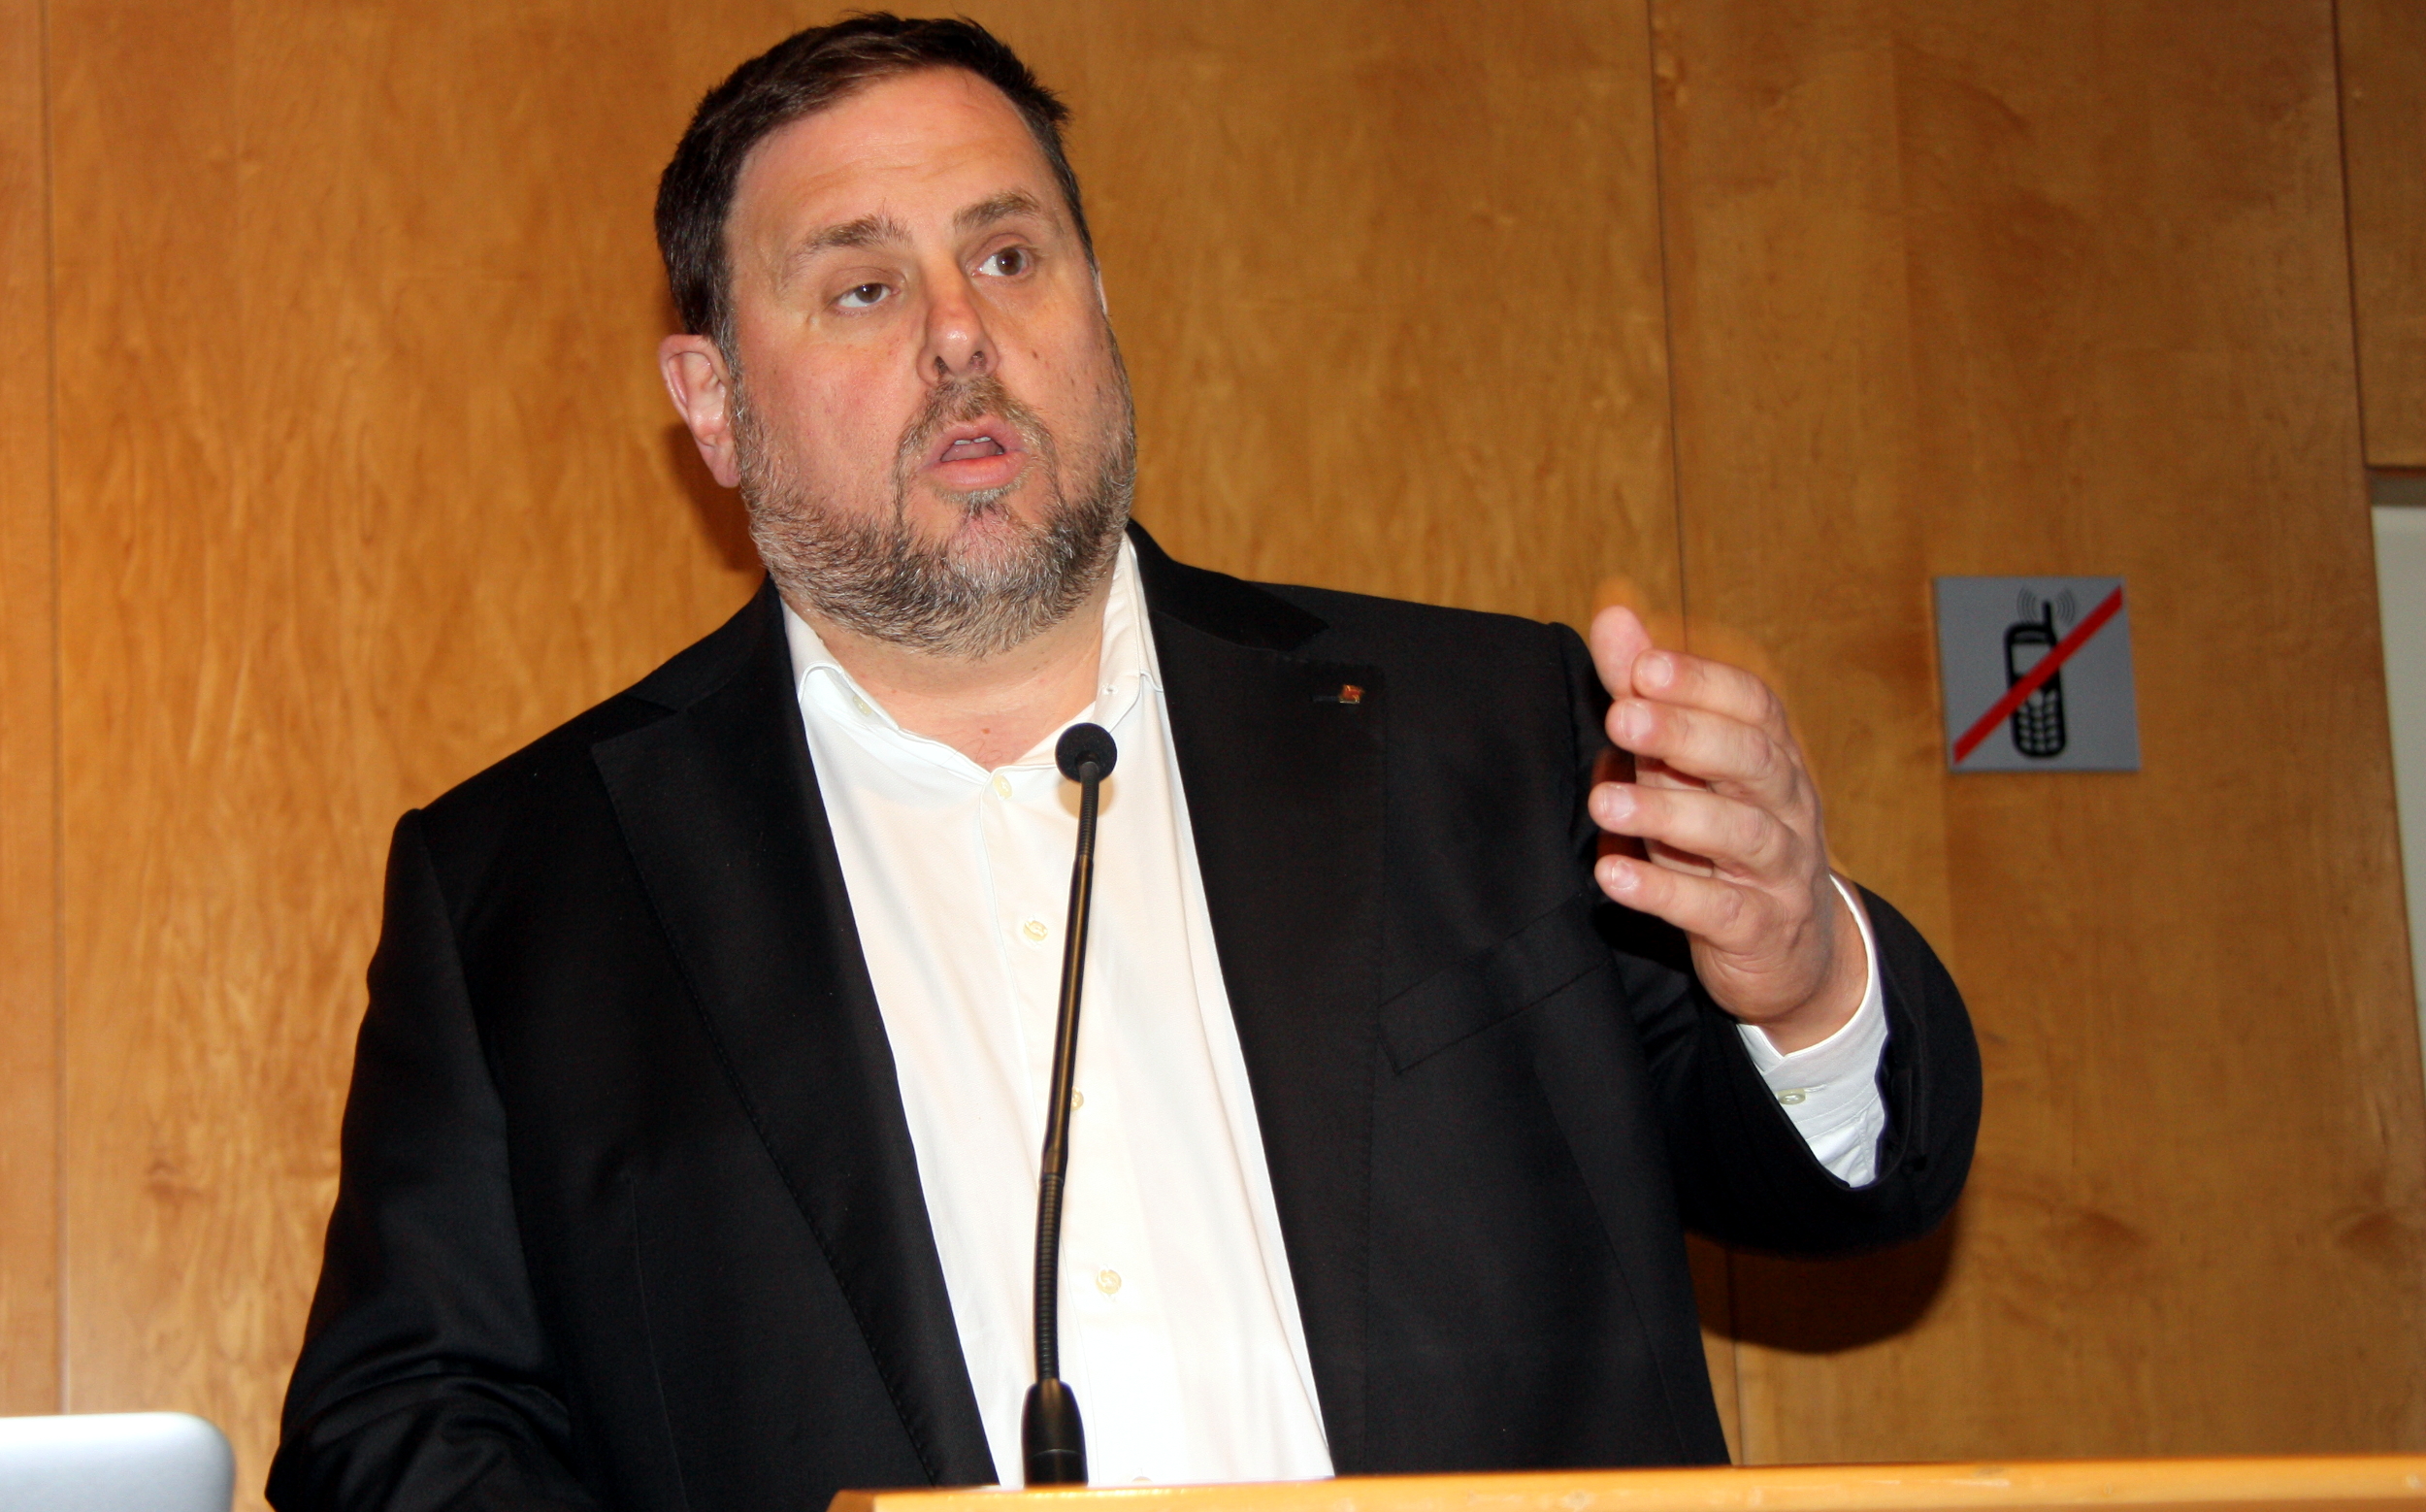 Catalan vice president, Oriol Junqueras, in the presentation of a report on the financial sector in Catalonia